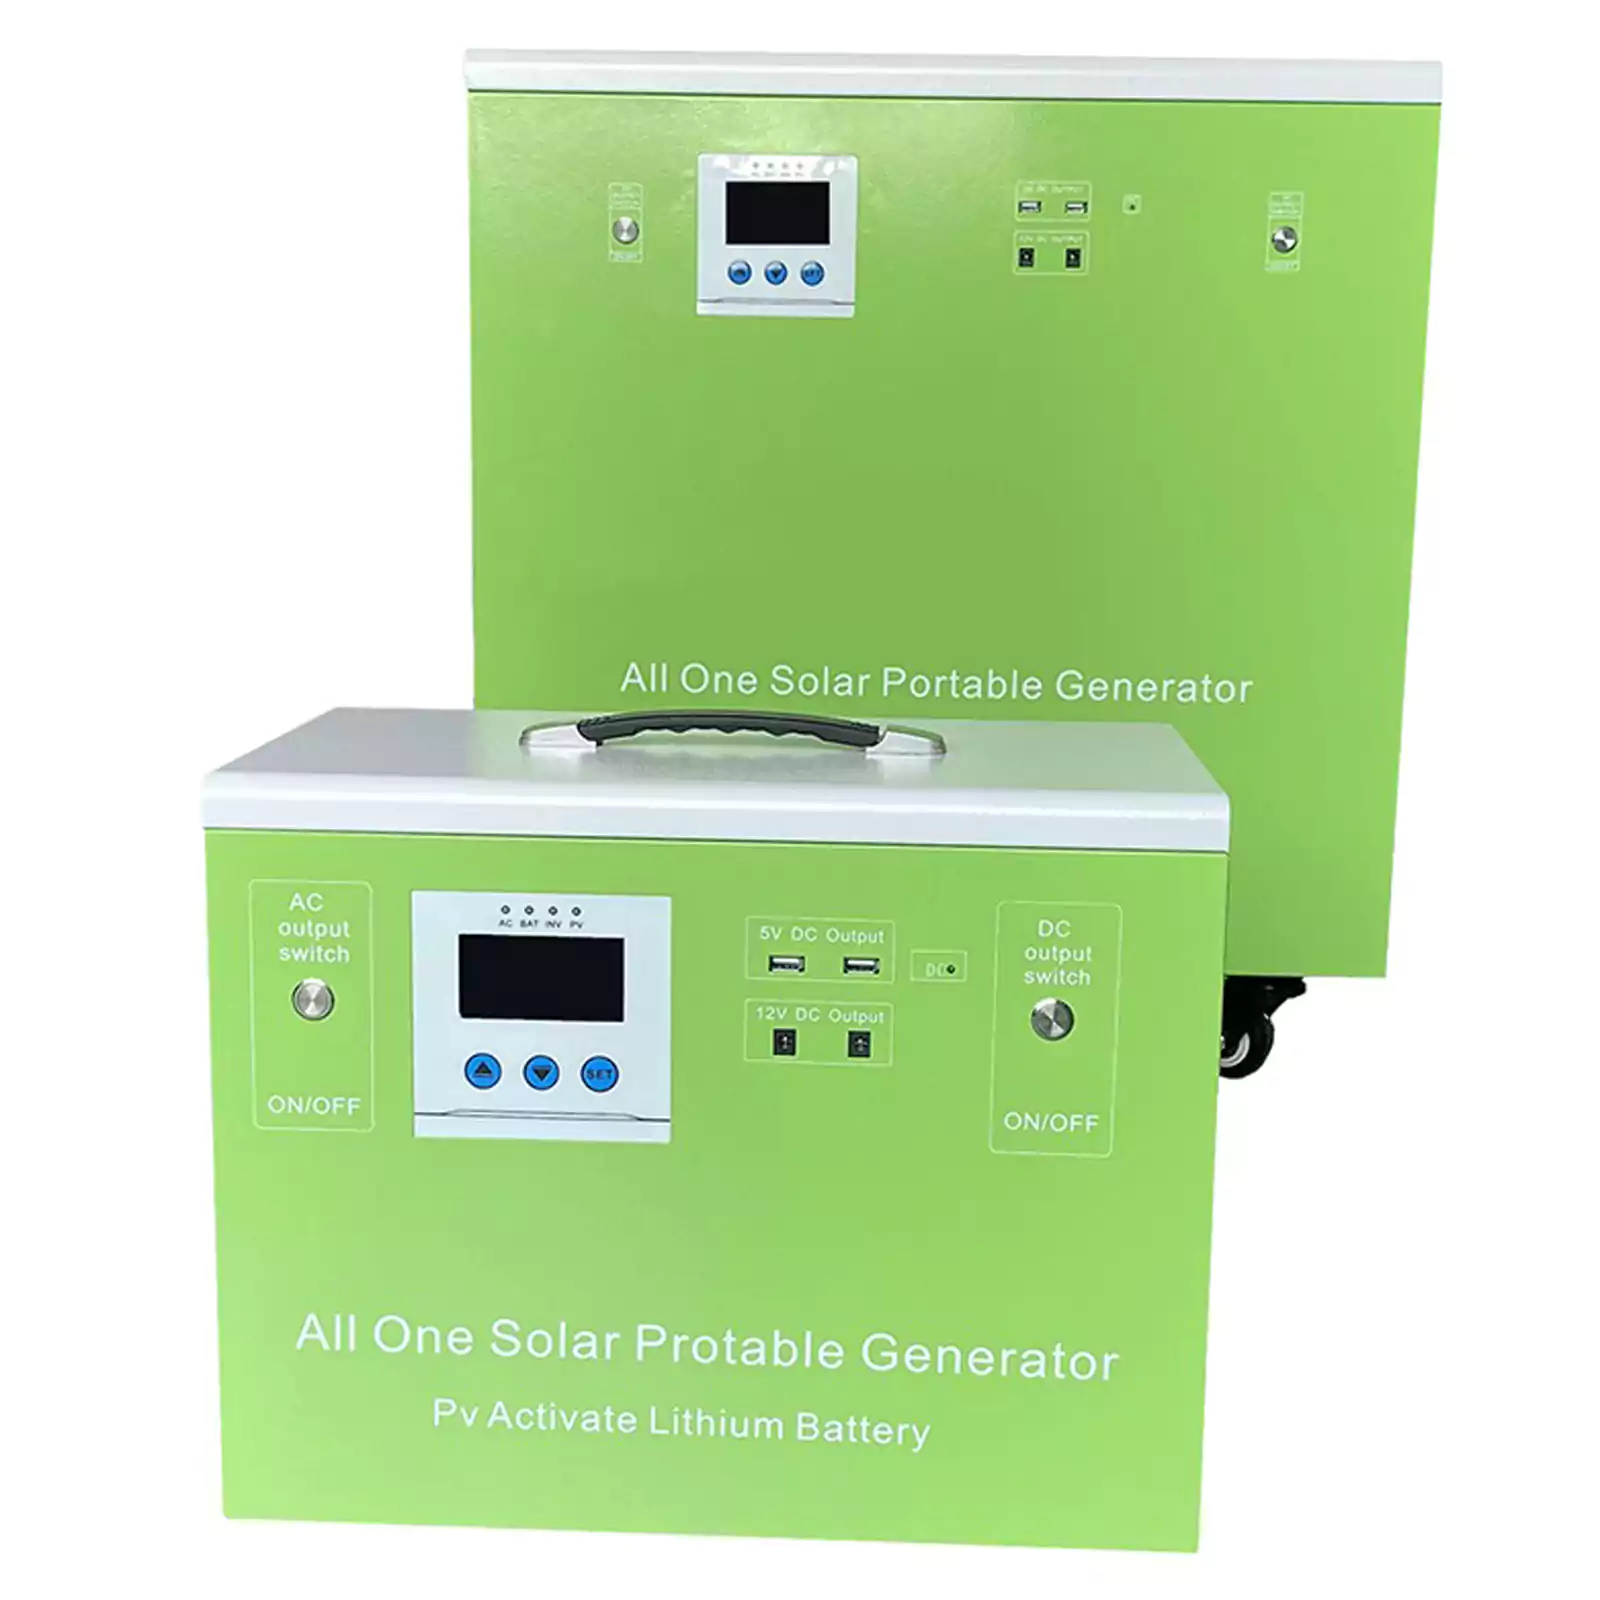 All-in-one home energy storage power supply